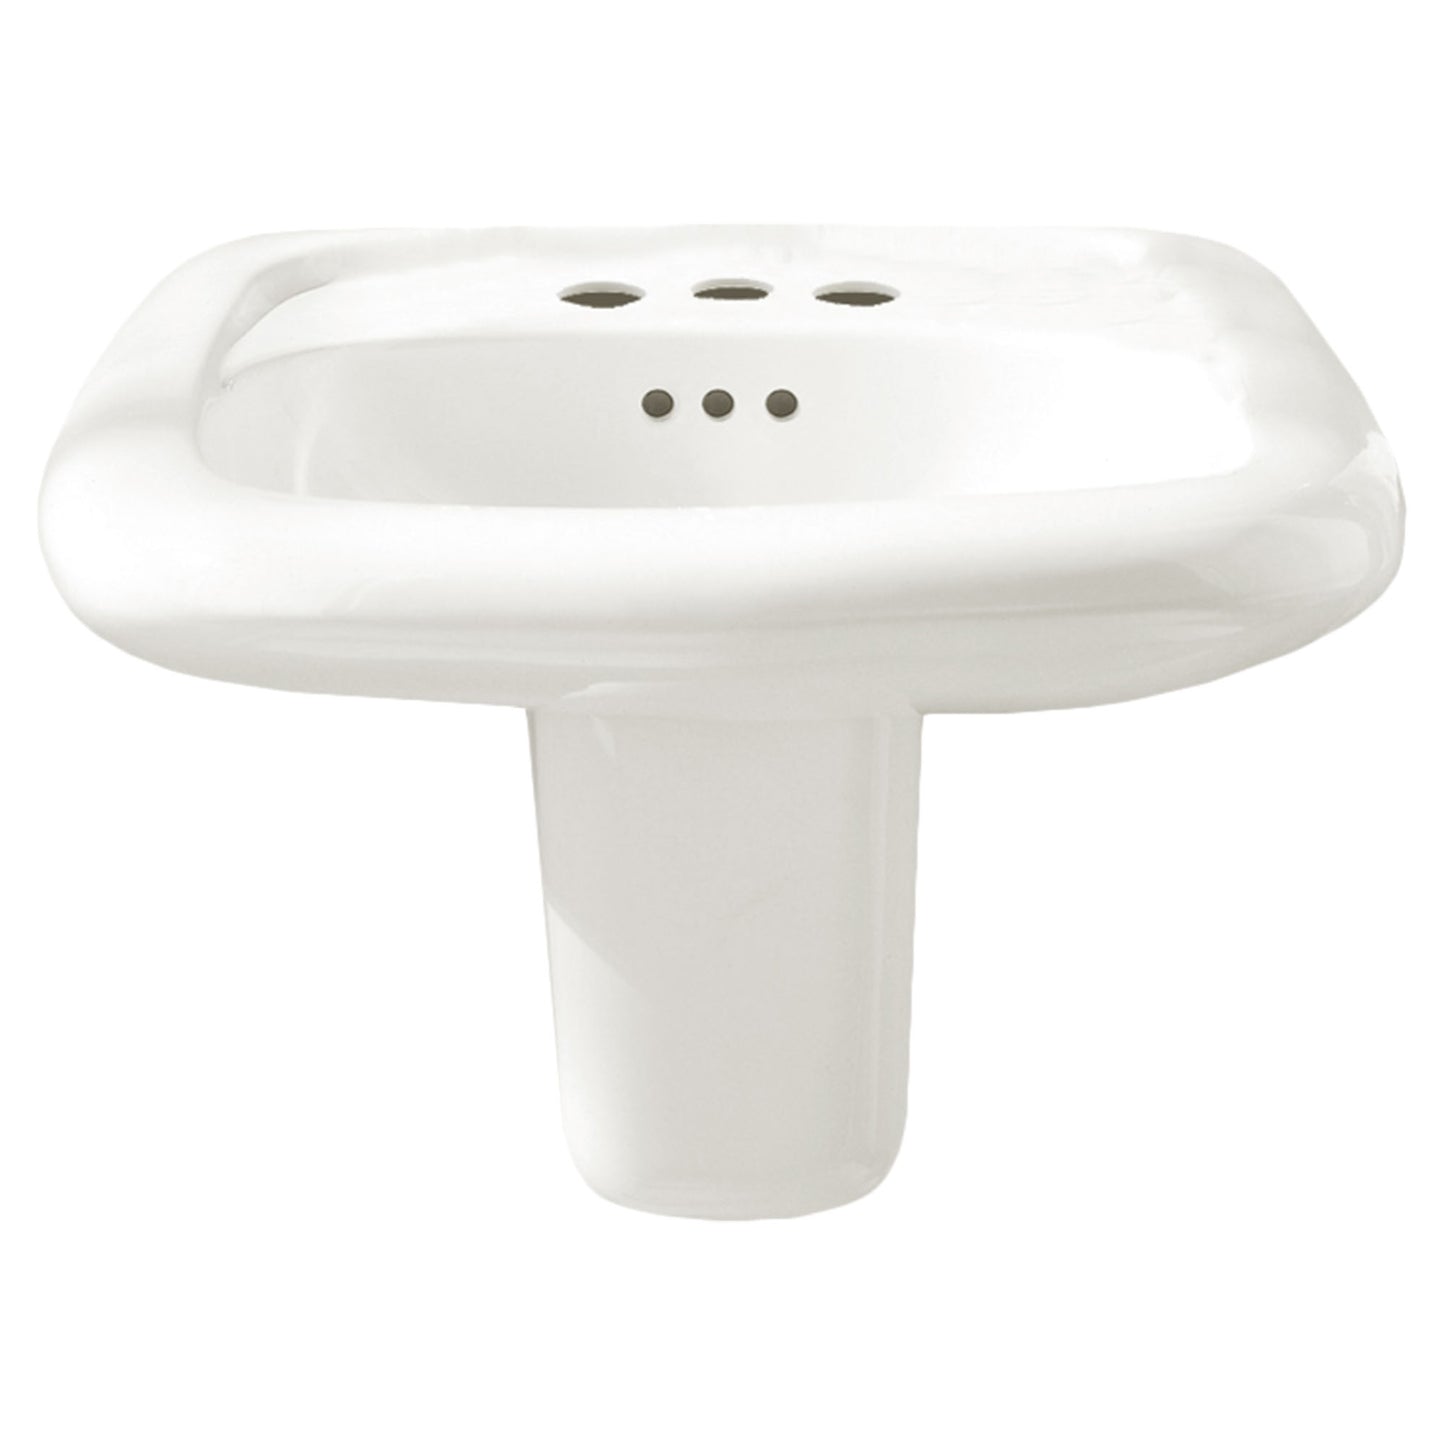 AMERICAN-STANDARD 0954004EC.020, Murro Wall-Hung EverClean Sink With 4-Inch Centerset in White